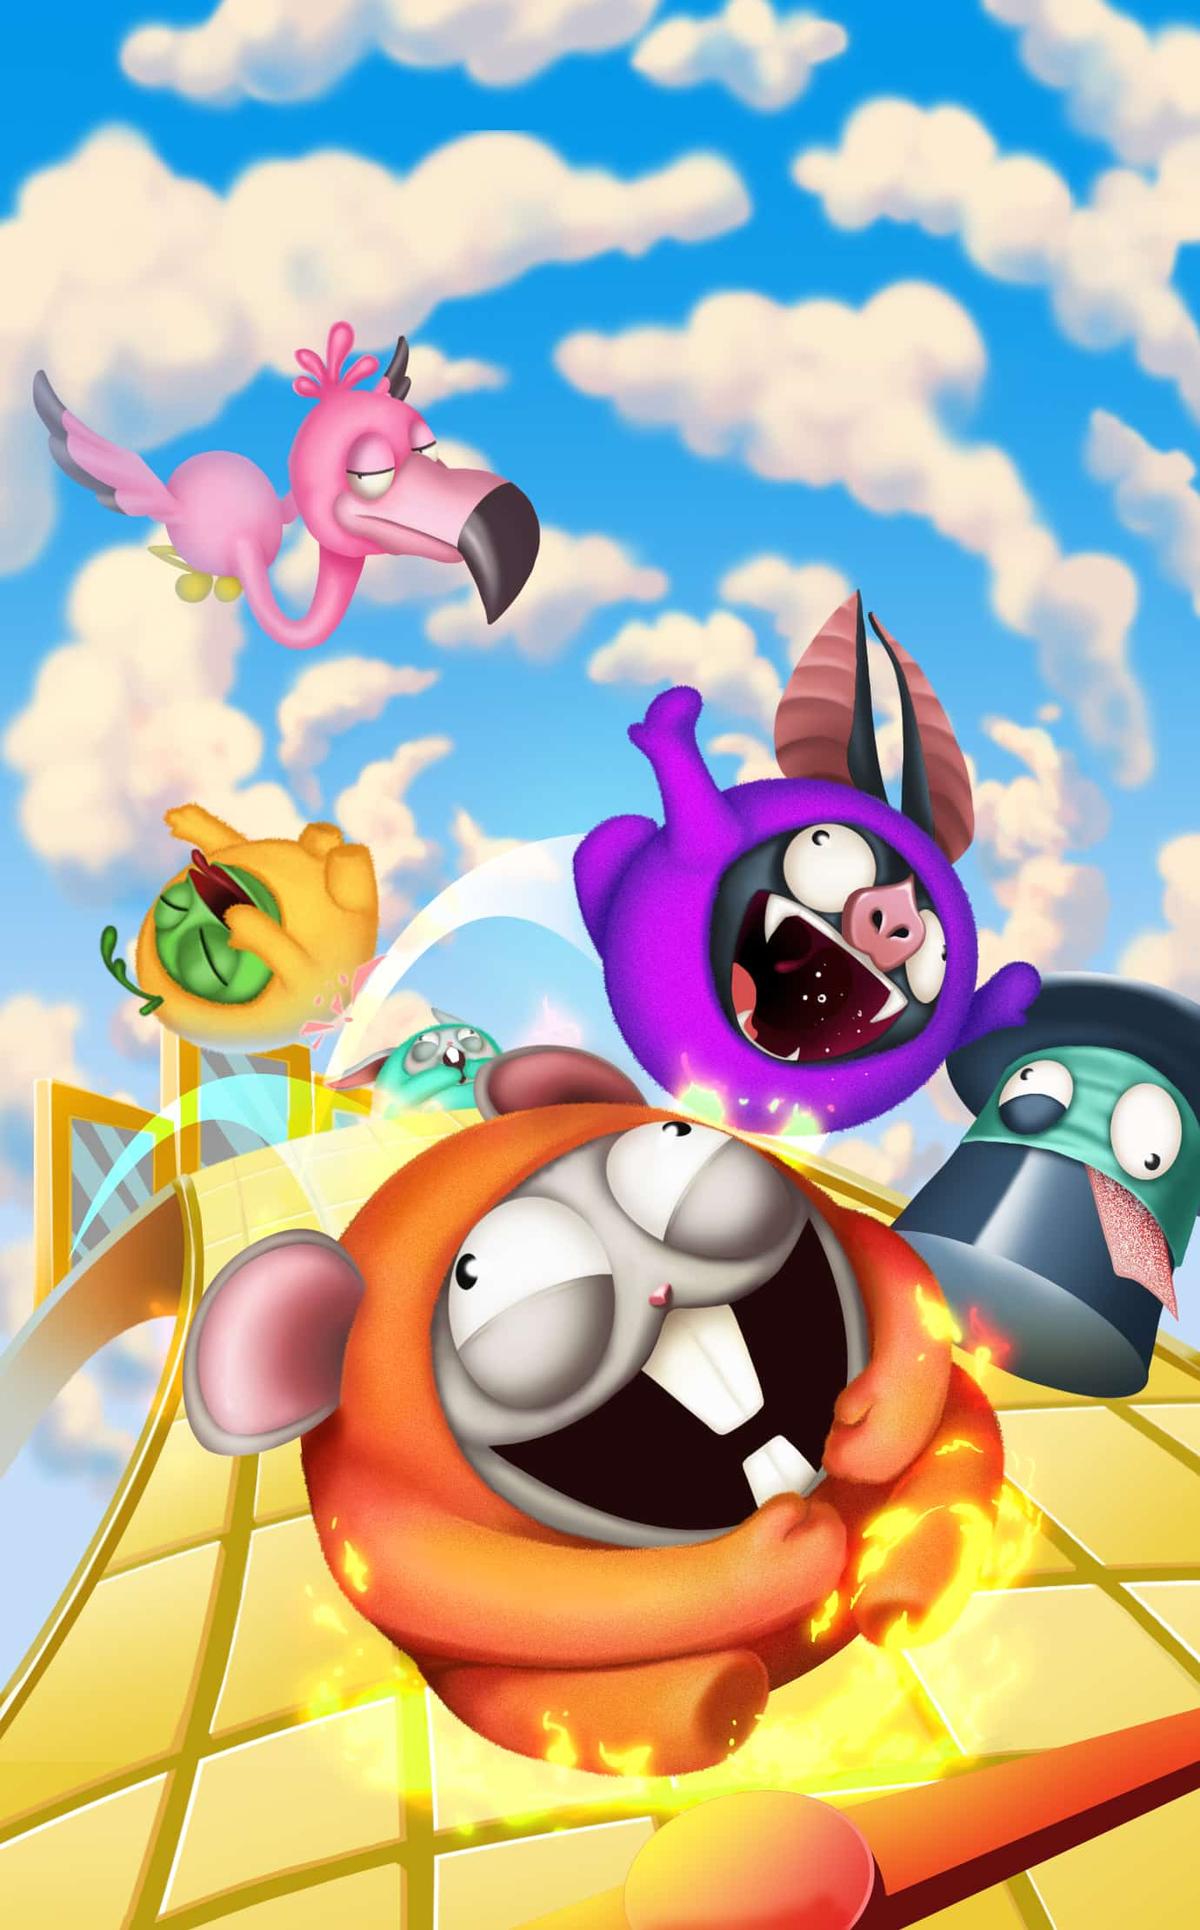 Ball Guys: Furry Road is the ultimate mobile PVP multiplayer game